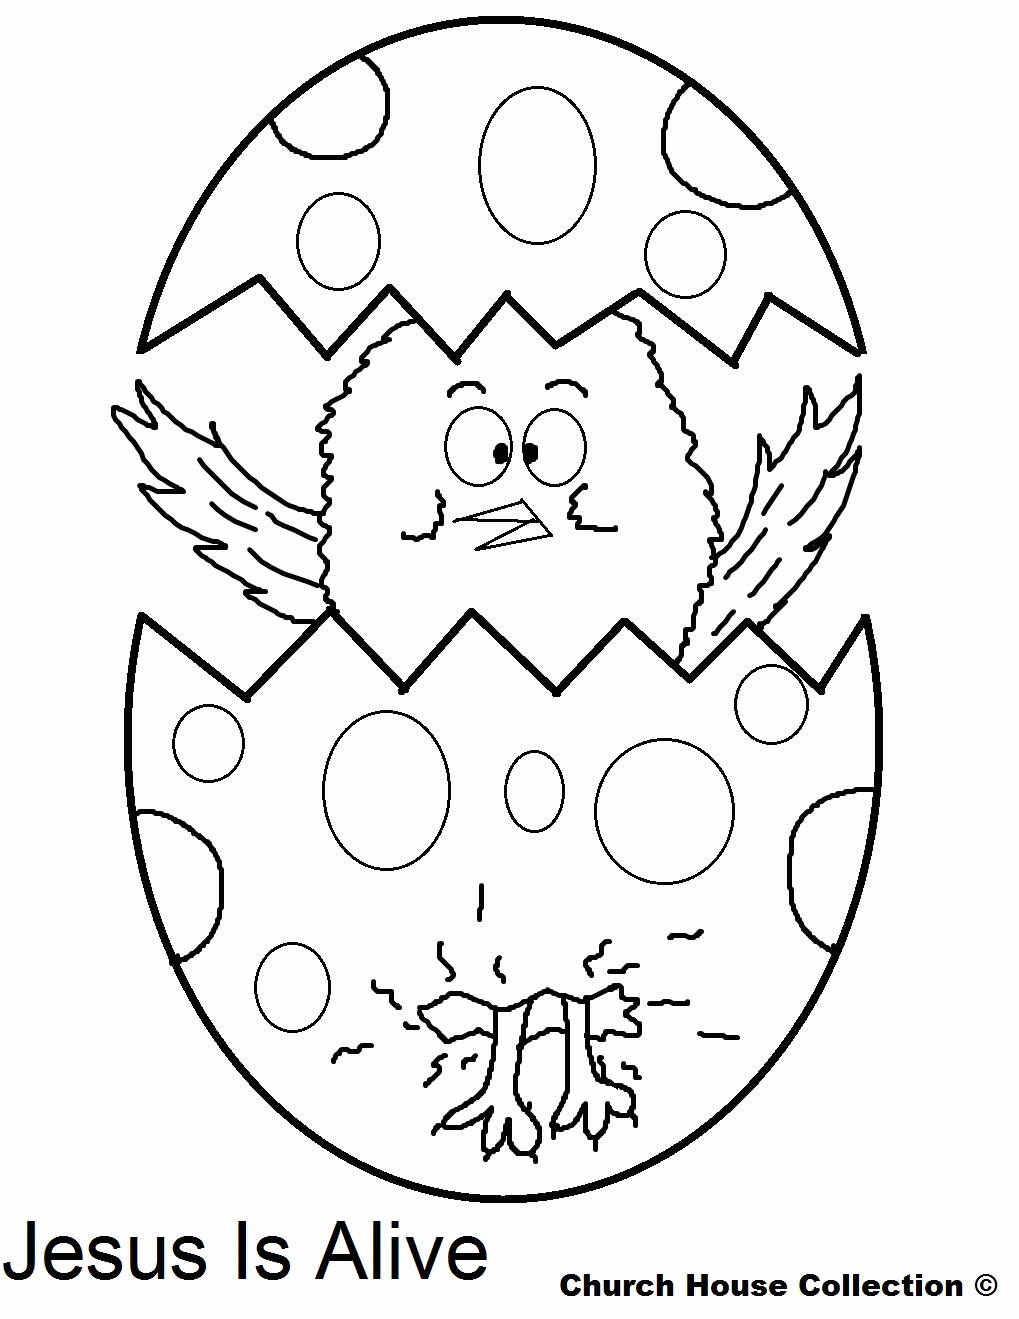 Easter Chick Coloring Page - Coloring Pages for Kids and for Adults